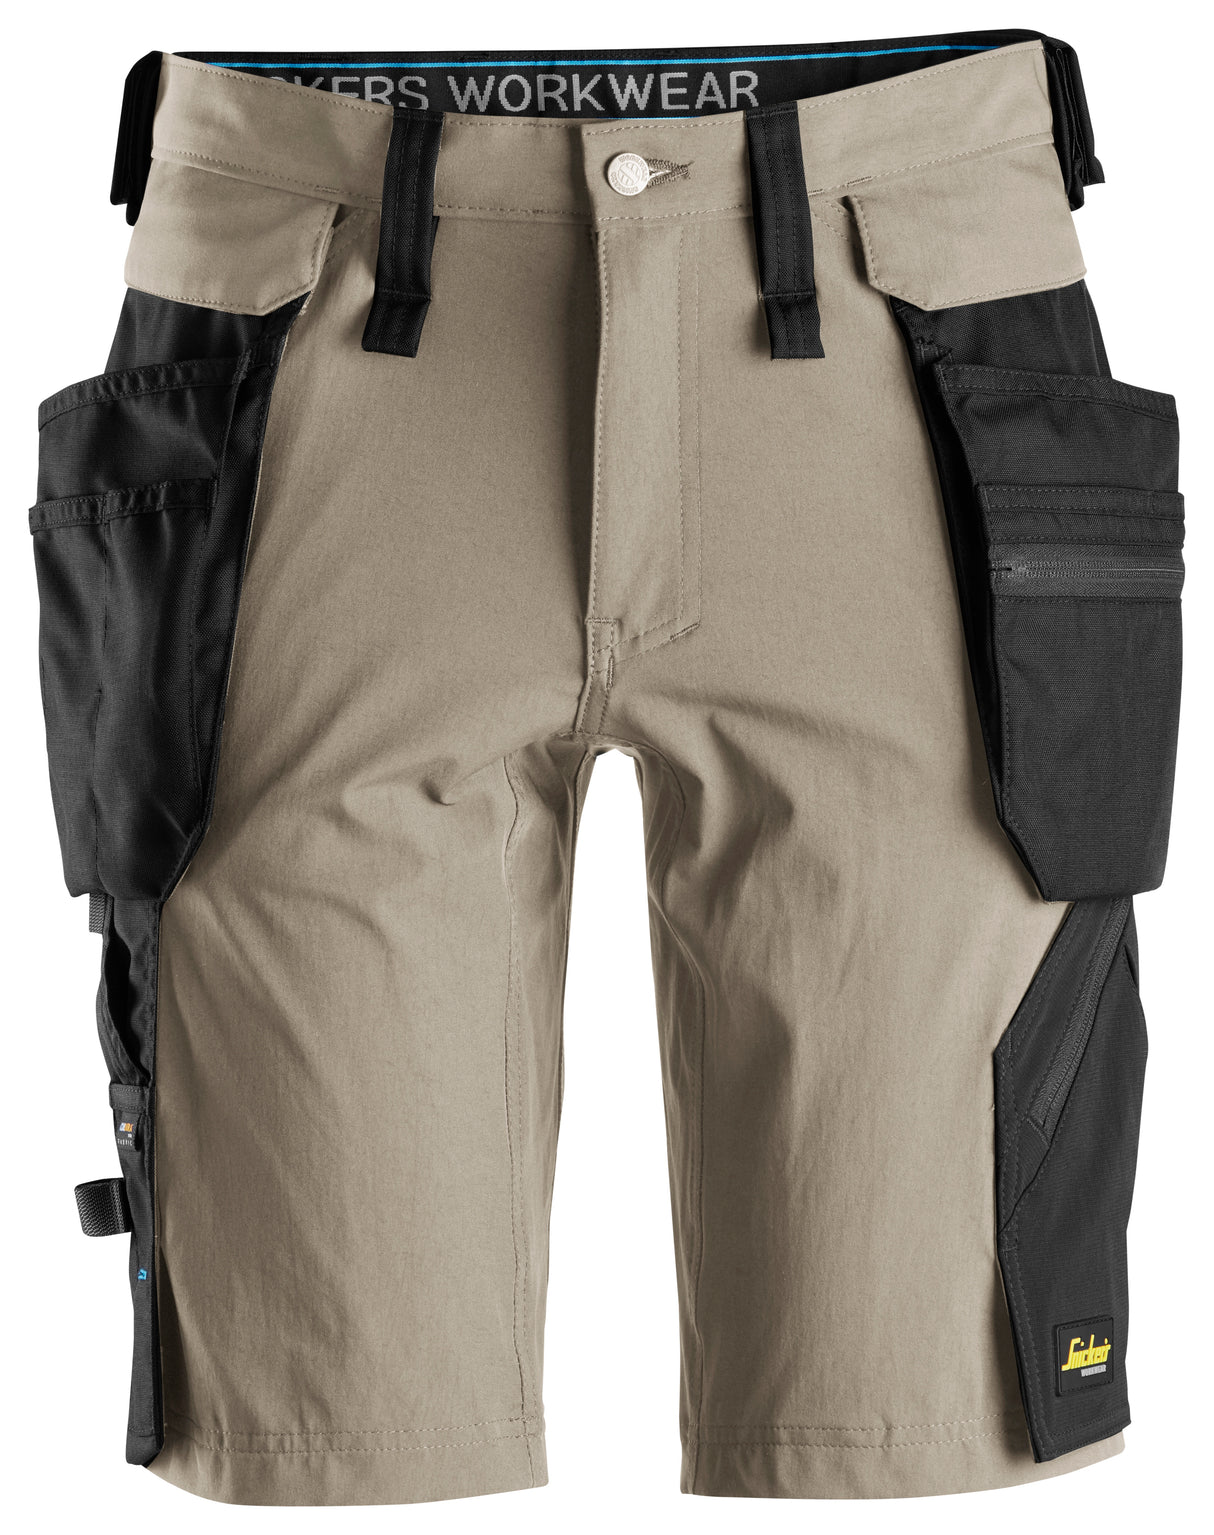 Snickers 6108 Litework Shorts Detachable Holster Pockets